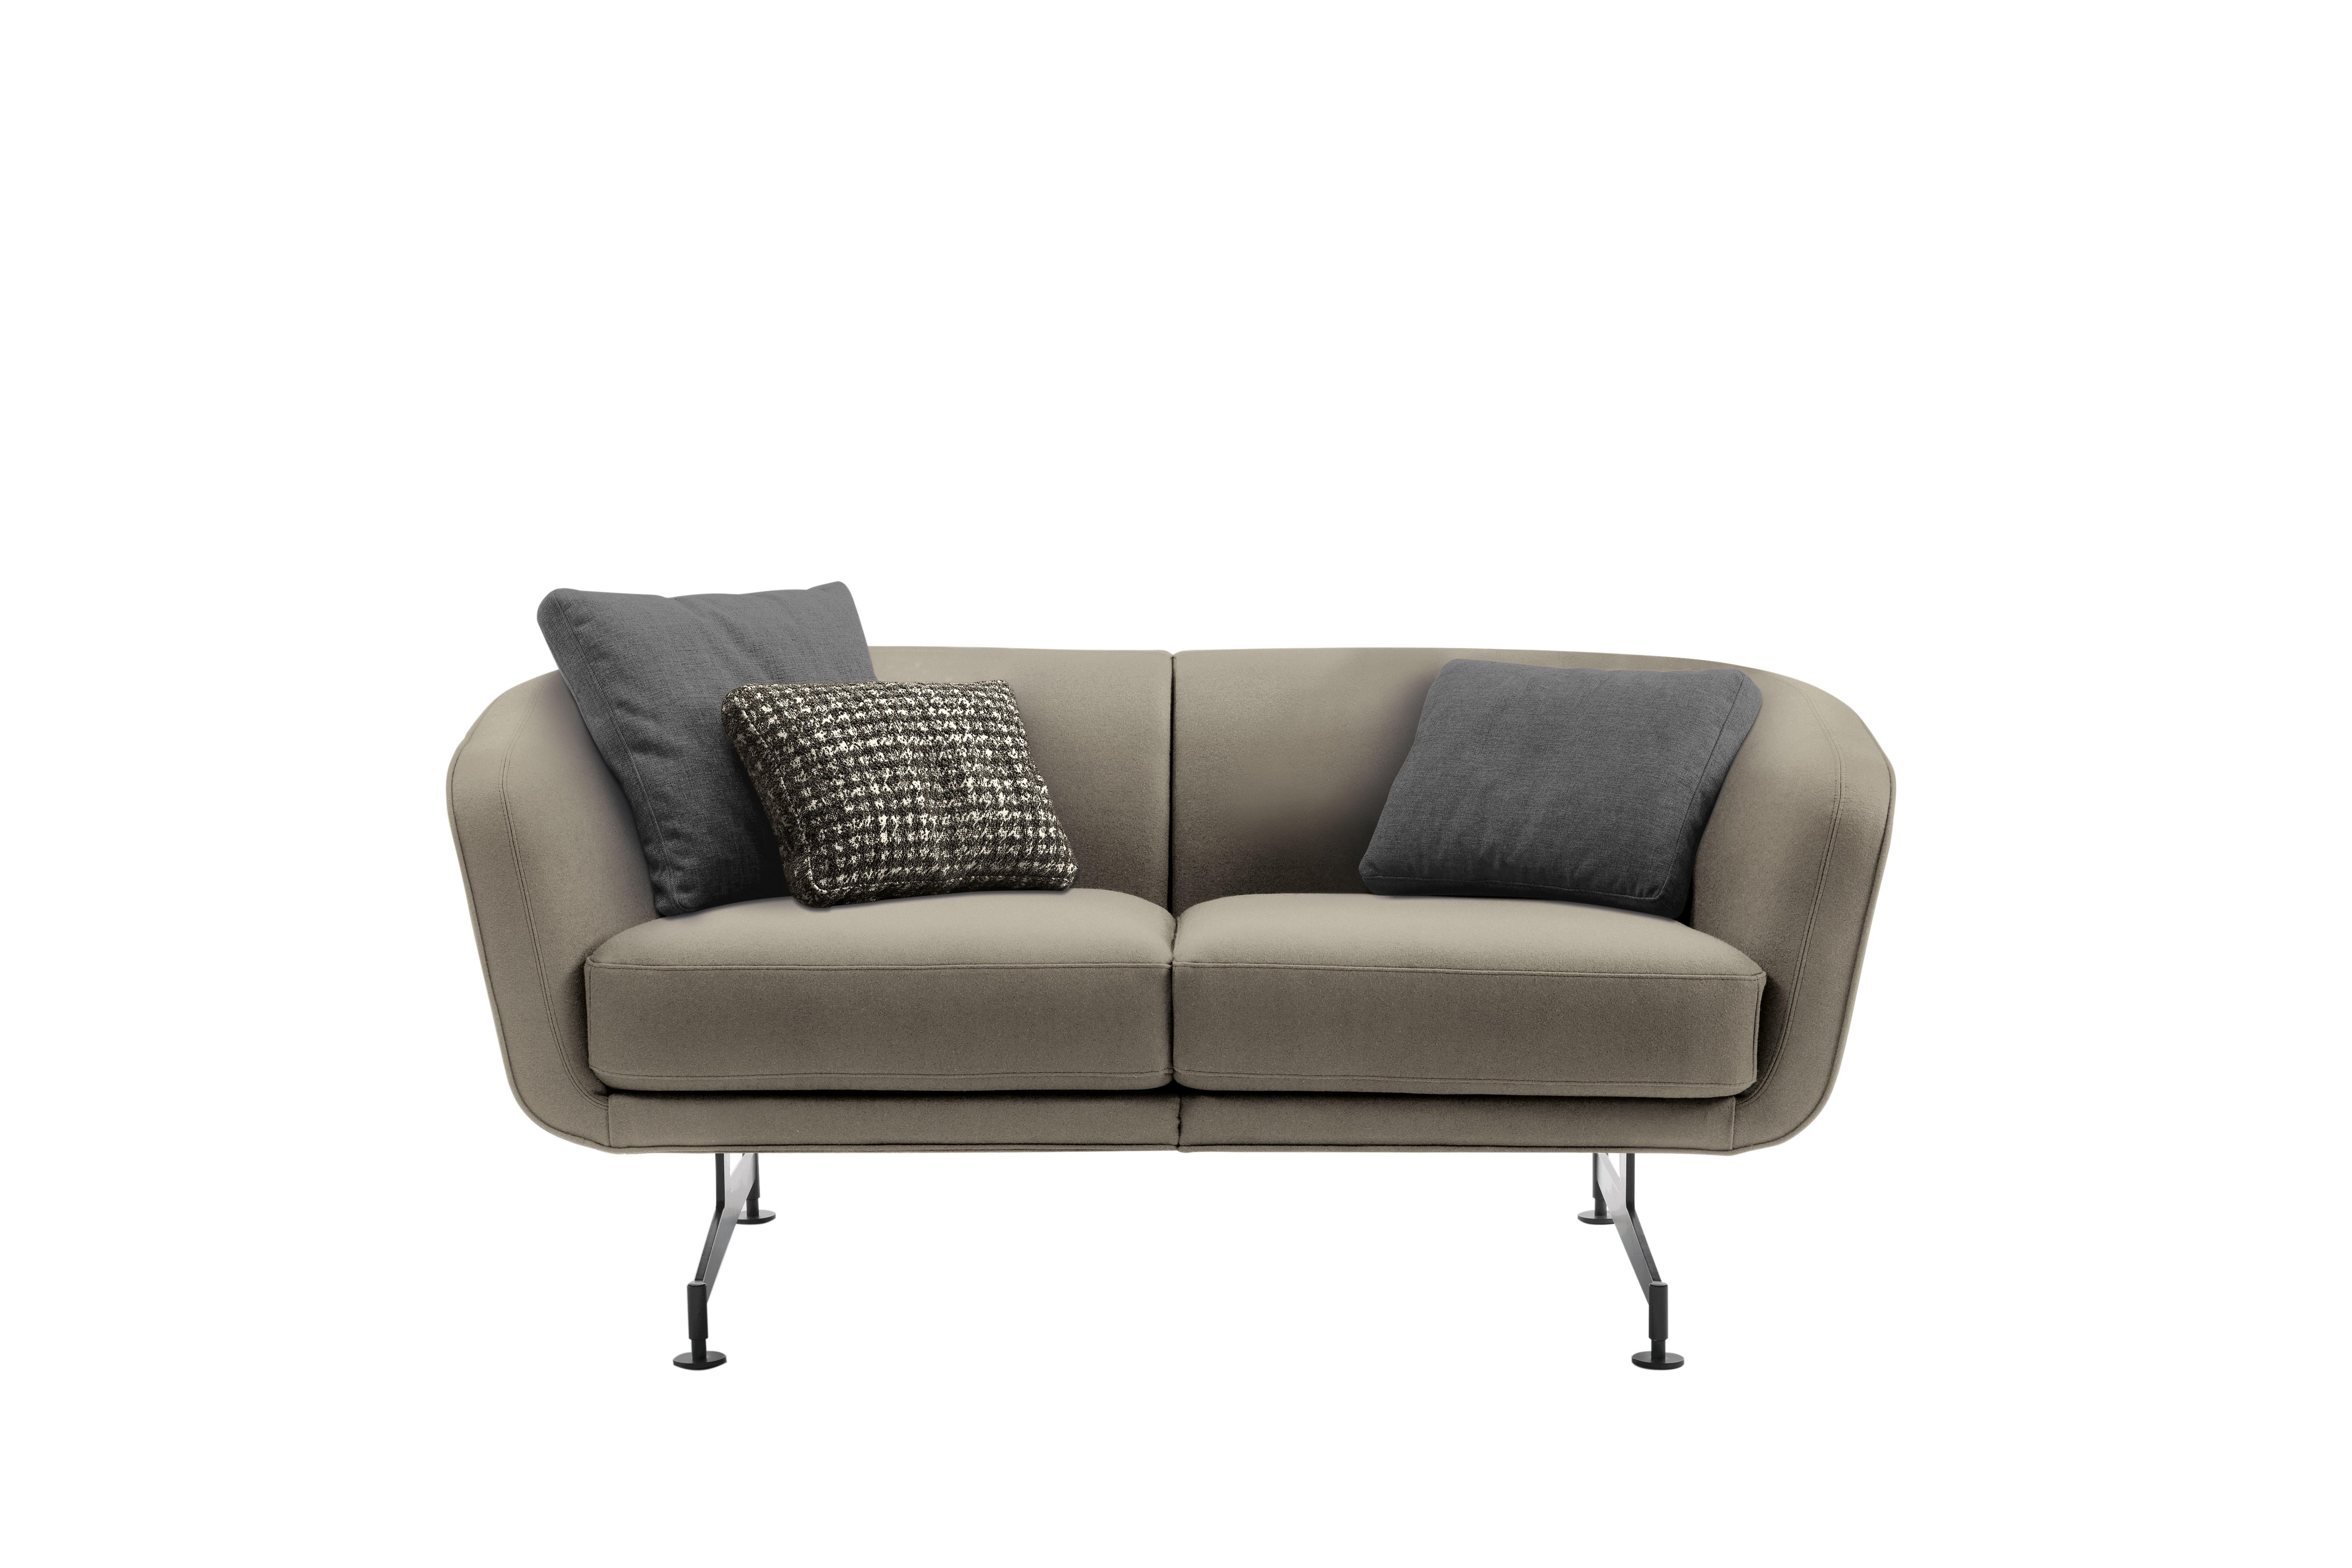 Betty is the two and three-seater sofa by Kartell with soft and rounded lines that create a comfortable and enveloping seat.

Available in Beige, Brown, Grey, Teal, Orange, Brown.